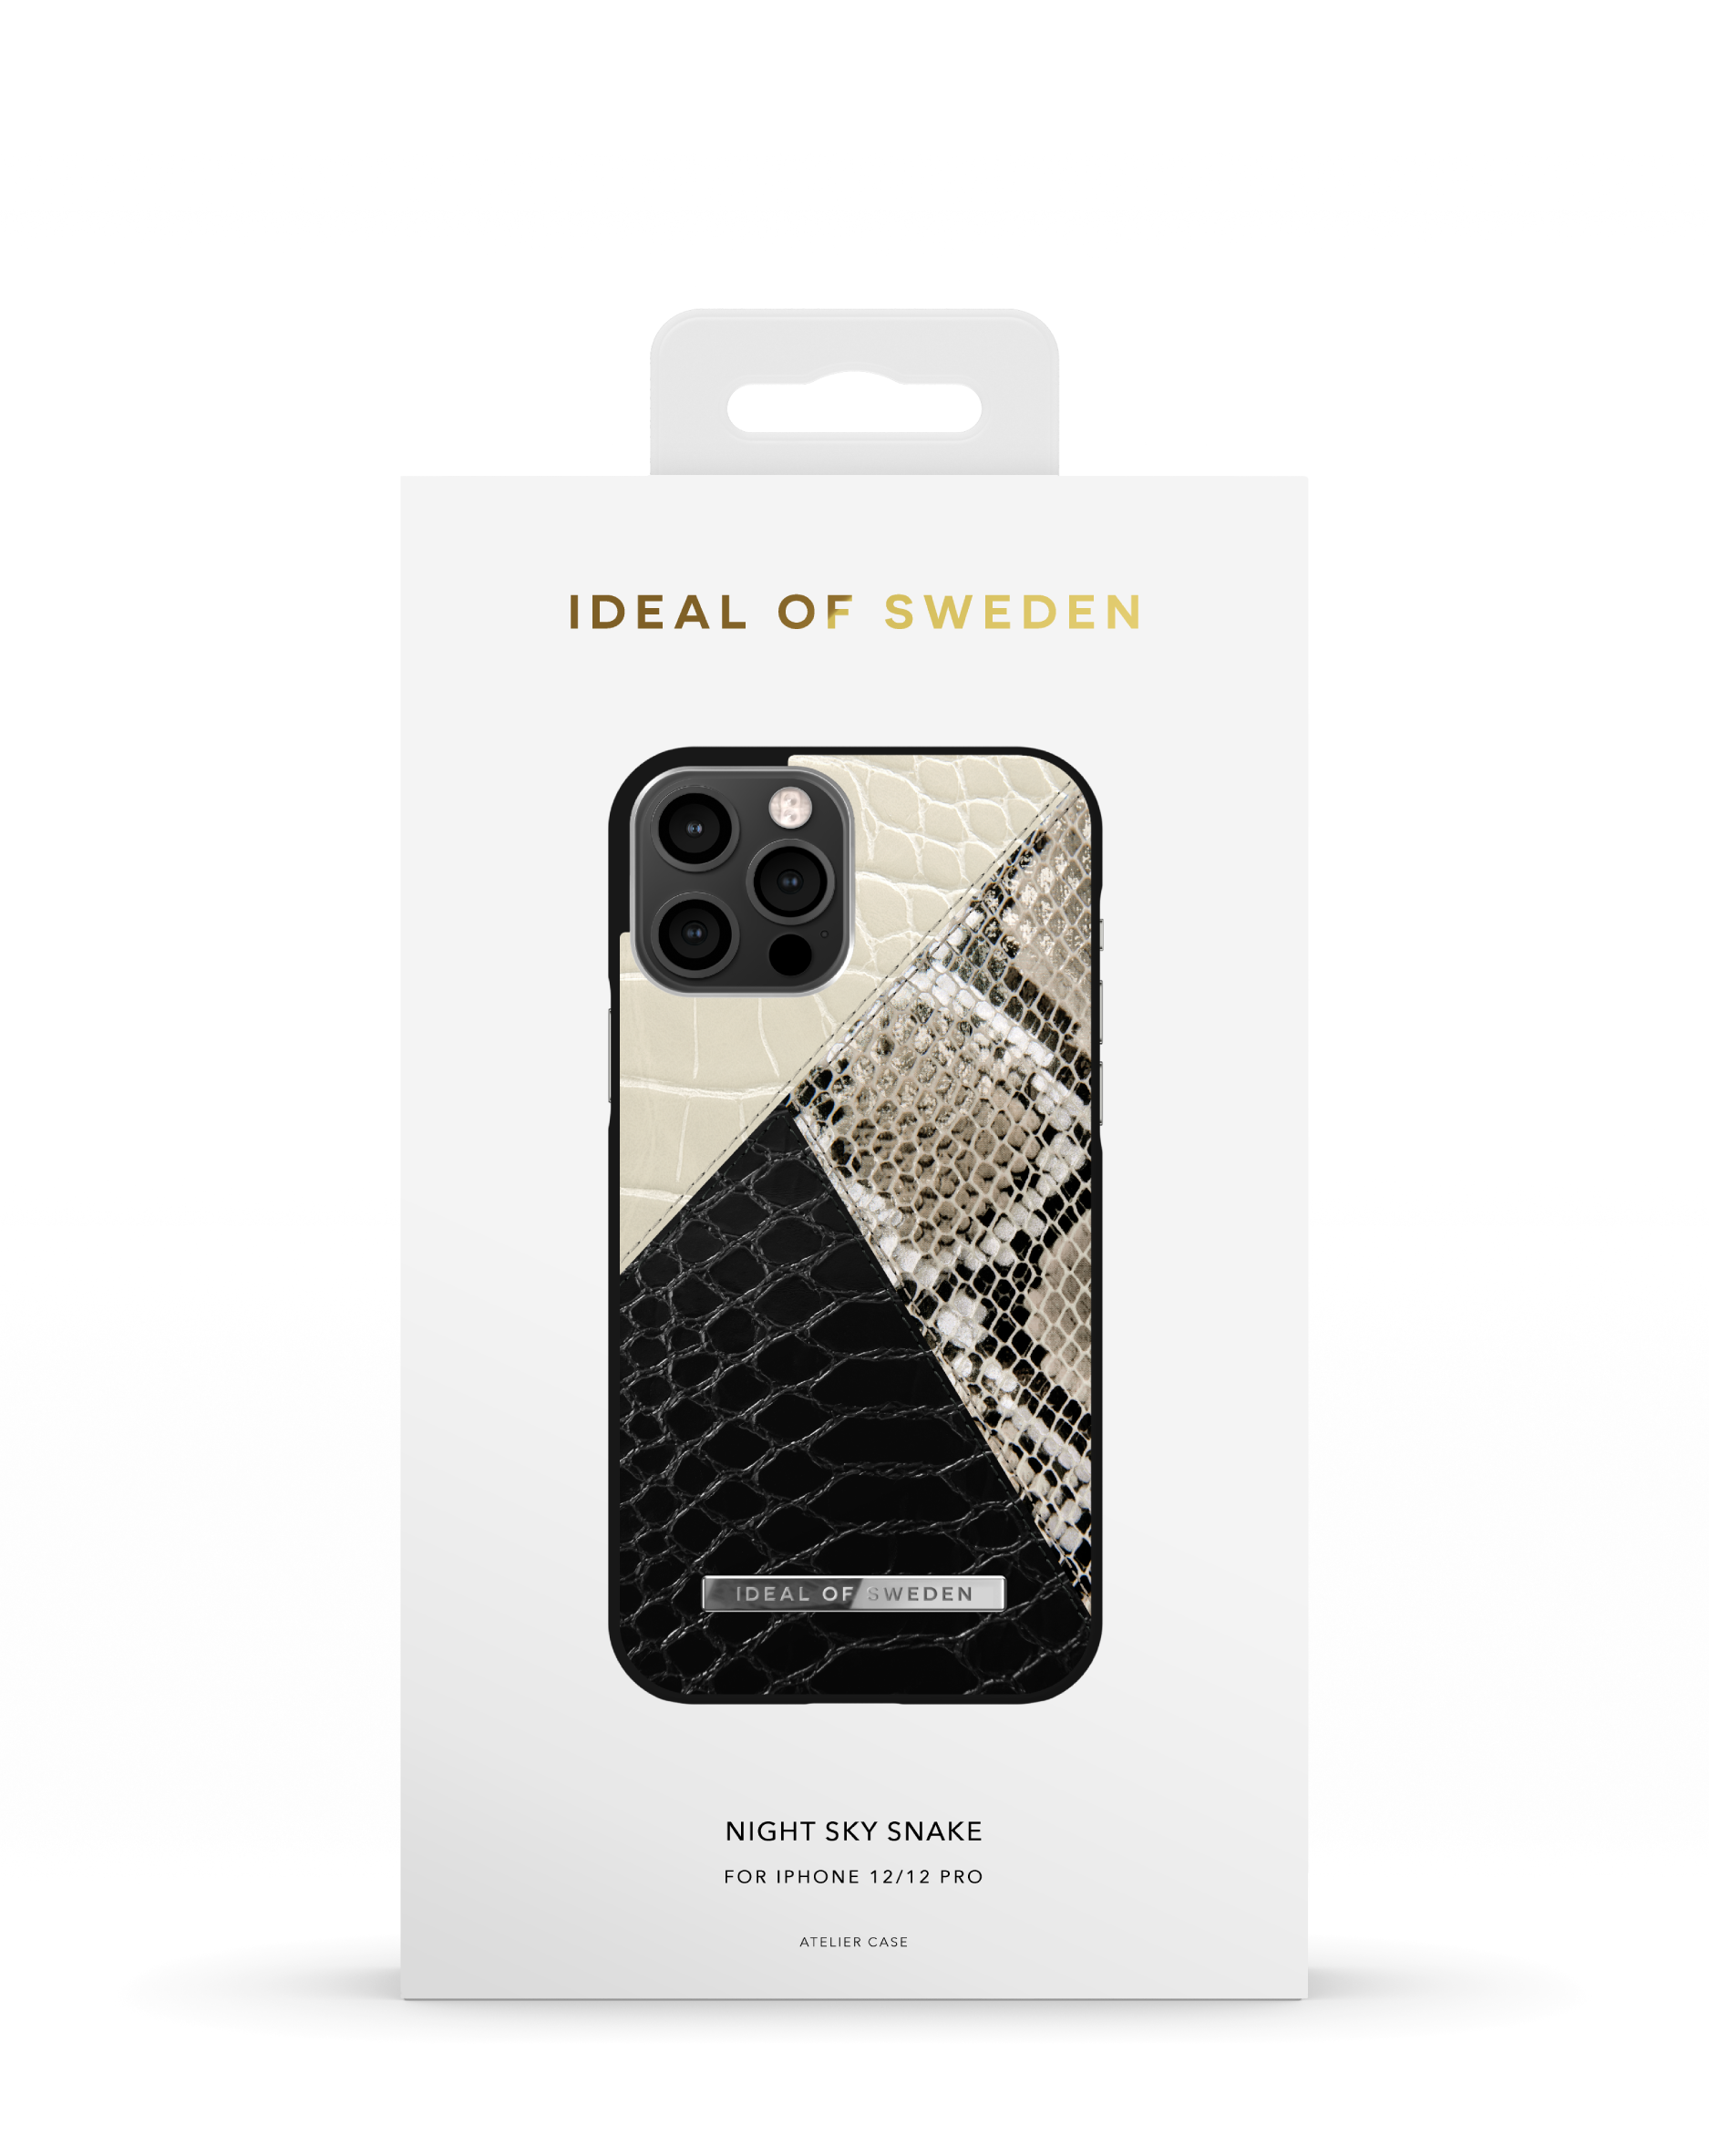 Snake 12 Night Apple 12, Sky Backcover, Apple, Apple IDACSS21-I2061-271, iPhone OF IDEAL iPhone Pro, SWEDEN